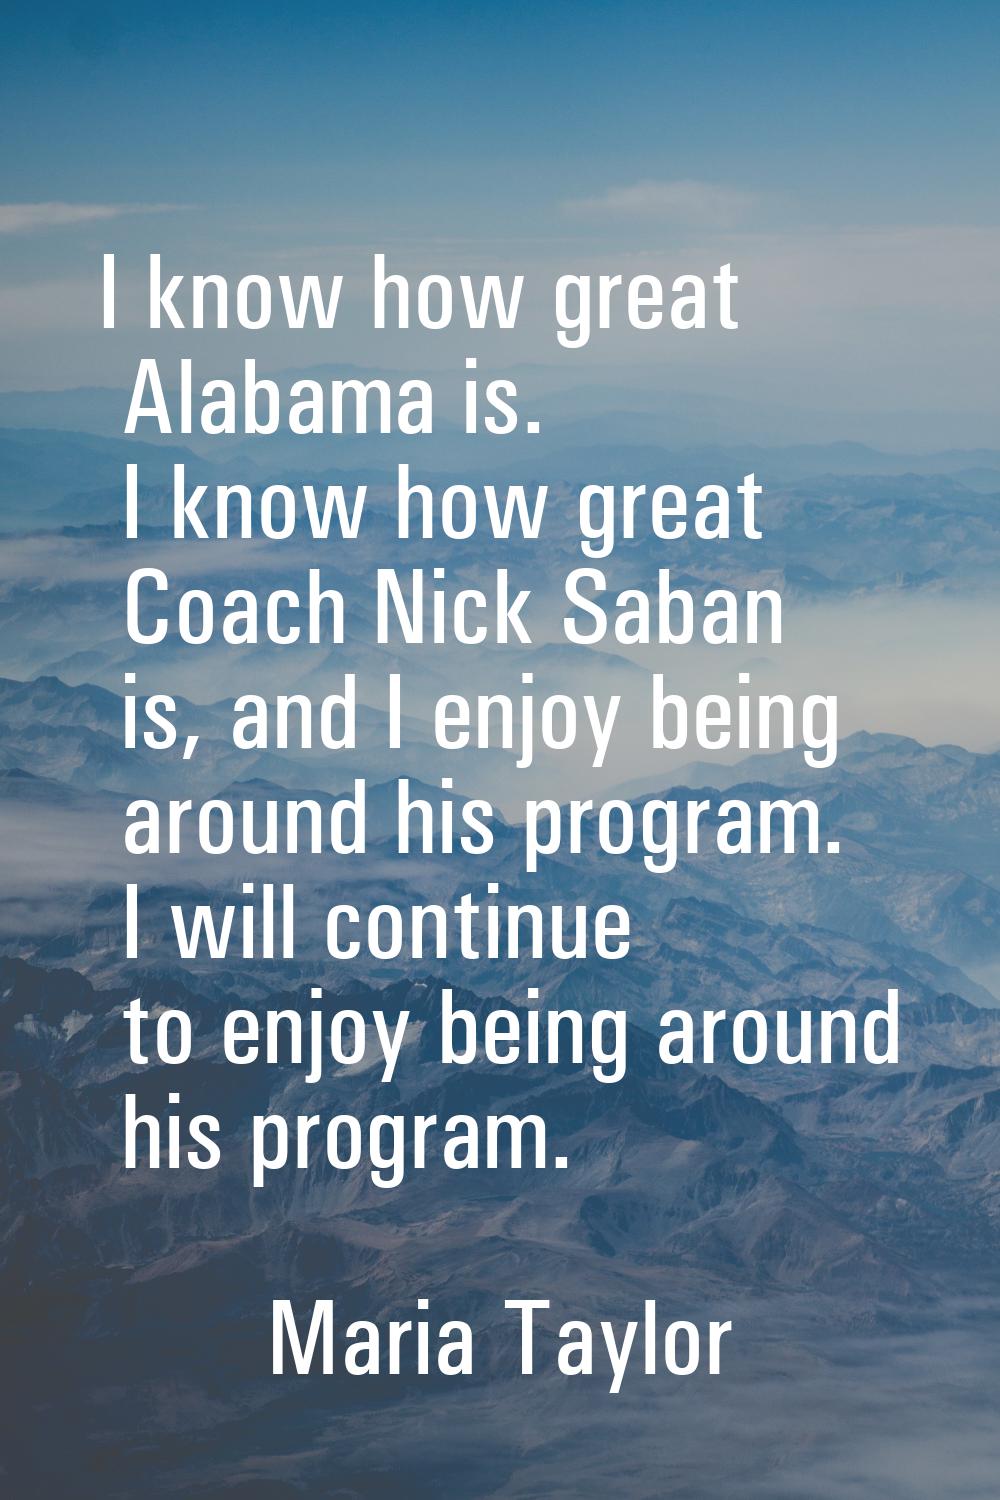 I know how great Alabama is. I know how great Coach Nick Saban is, and I enjoy being around his pro